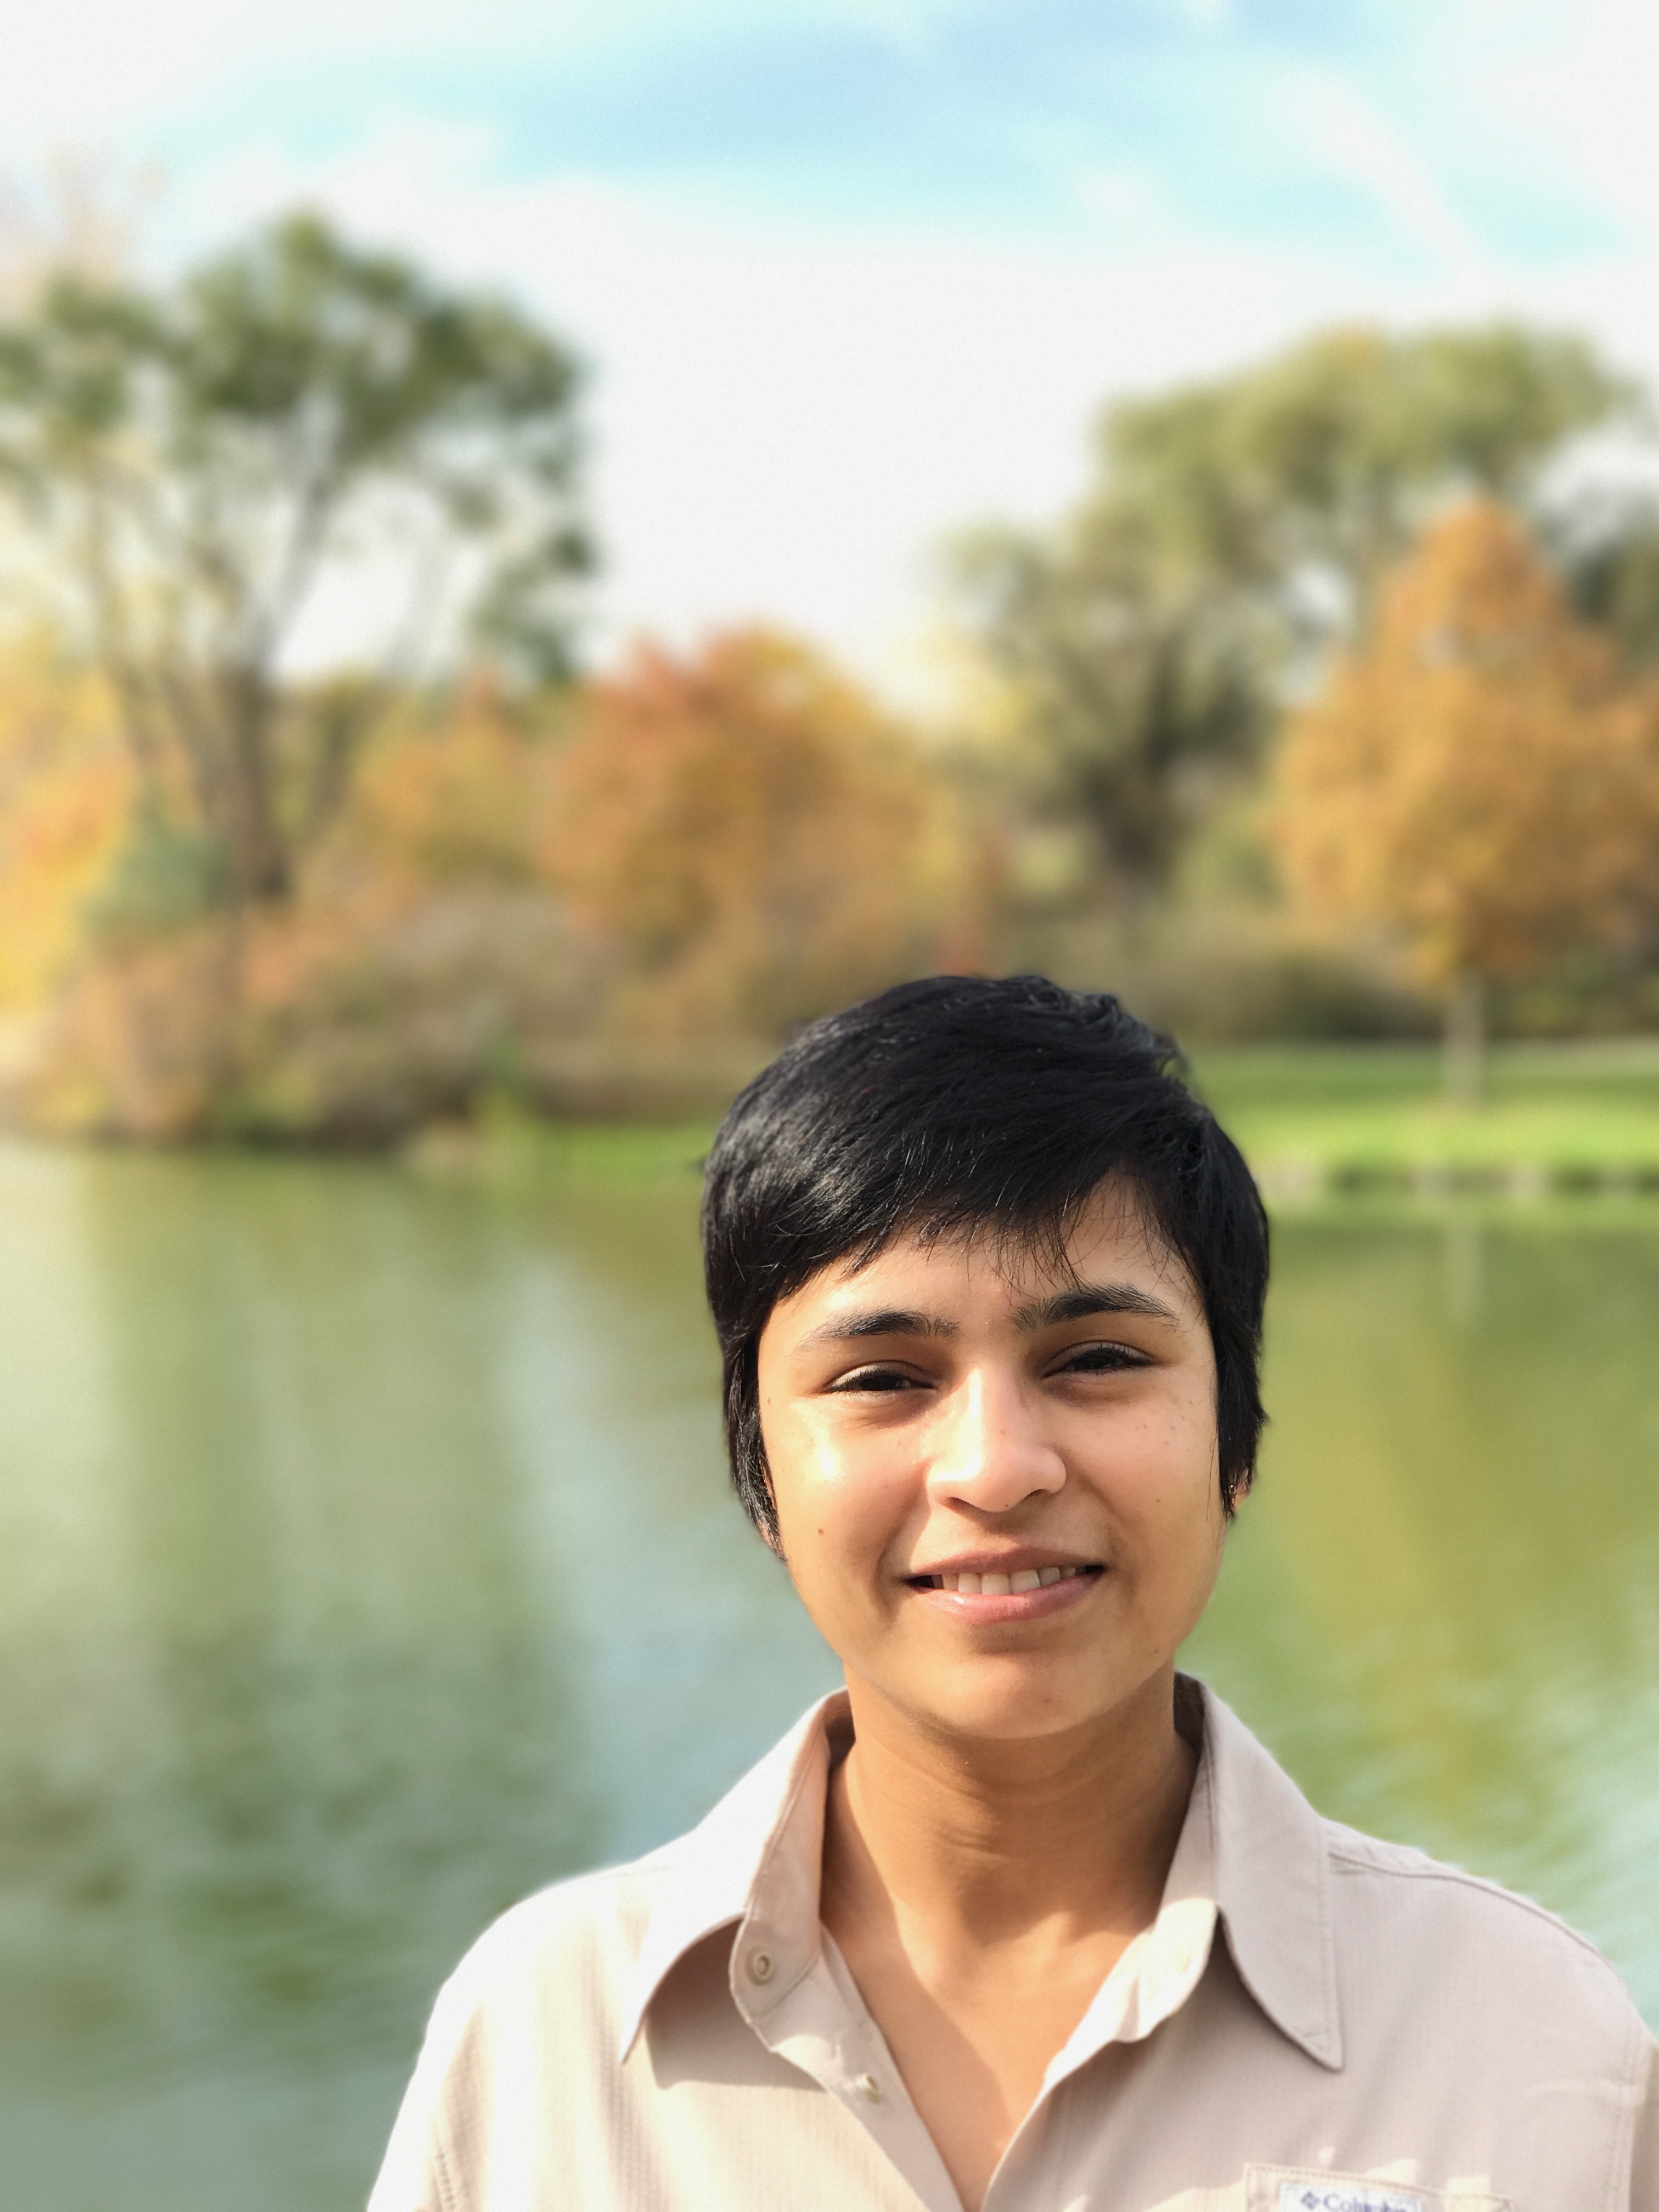 20161029sa1120-portrait-photo-of-makur-jain-taken-with-the-iphone-7-plus-by-greg-johnson-img_6293